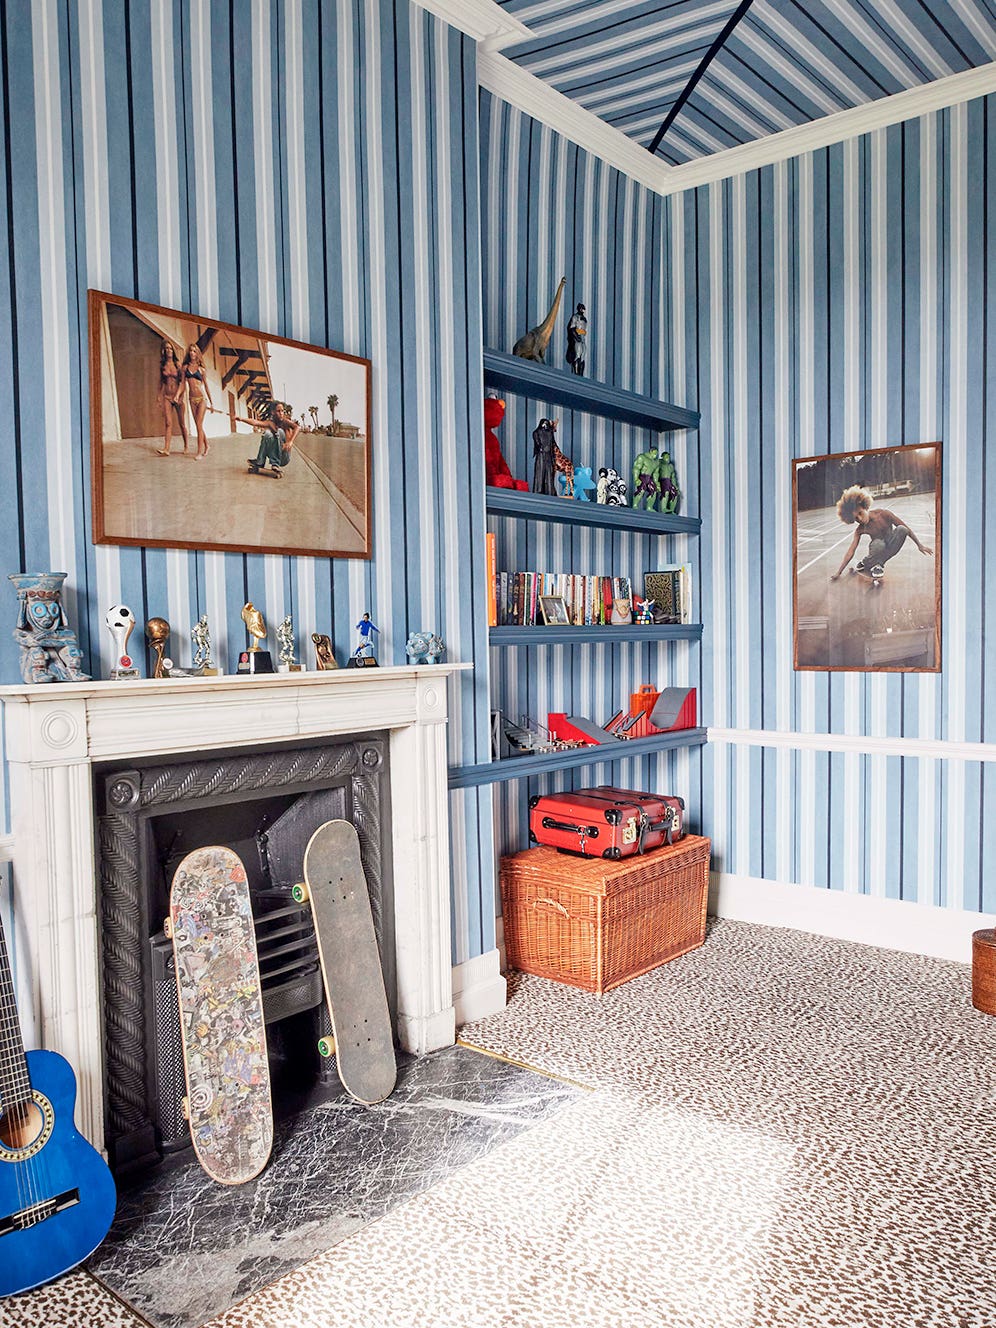 Children's room with blue striped walls.